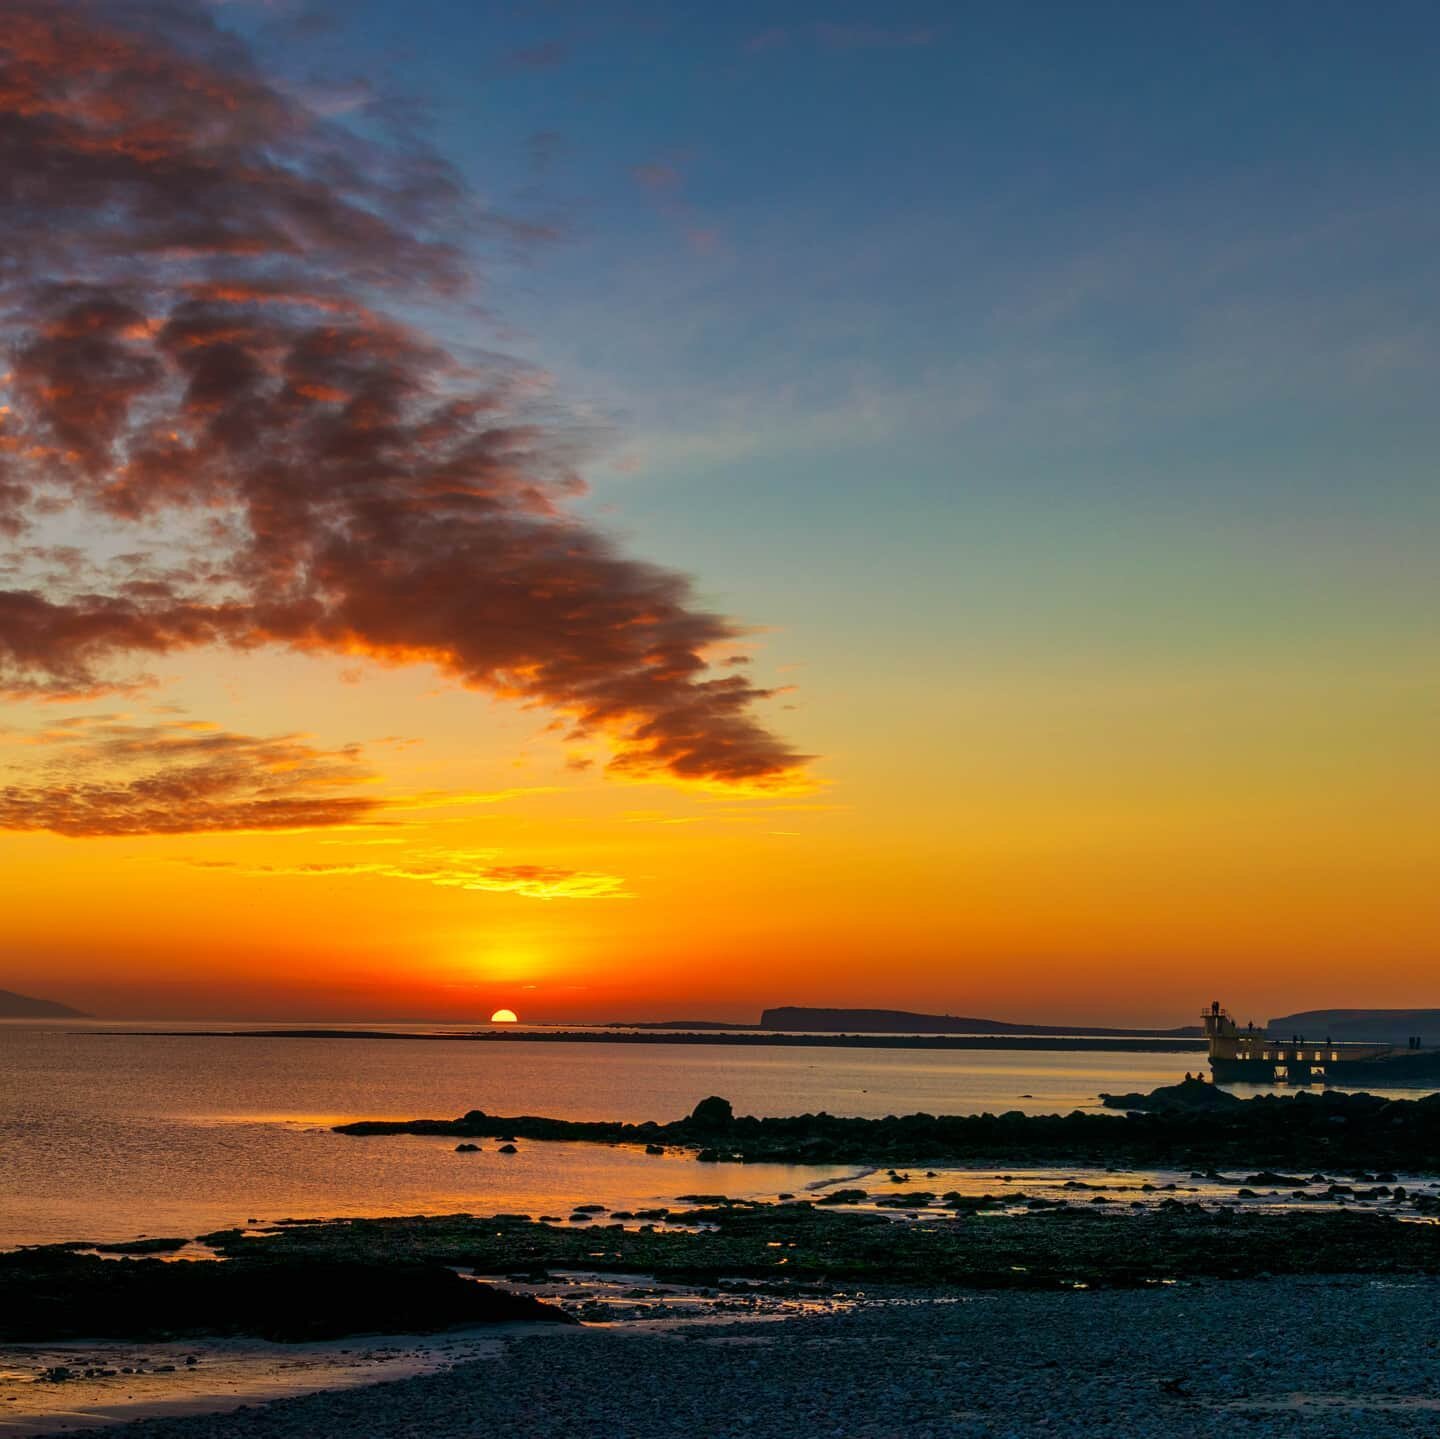 Sunset over Galway bay
#thisisgalway #latinquartergalway